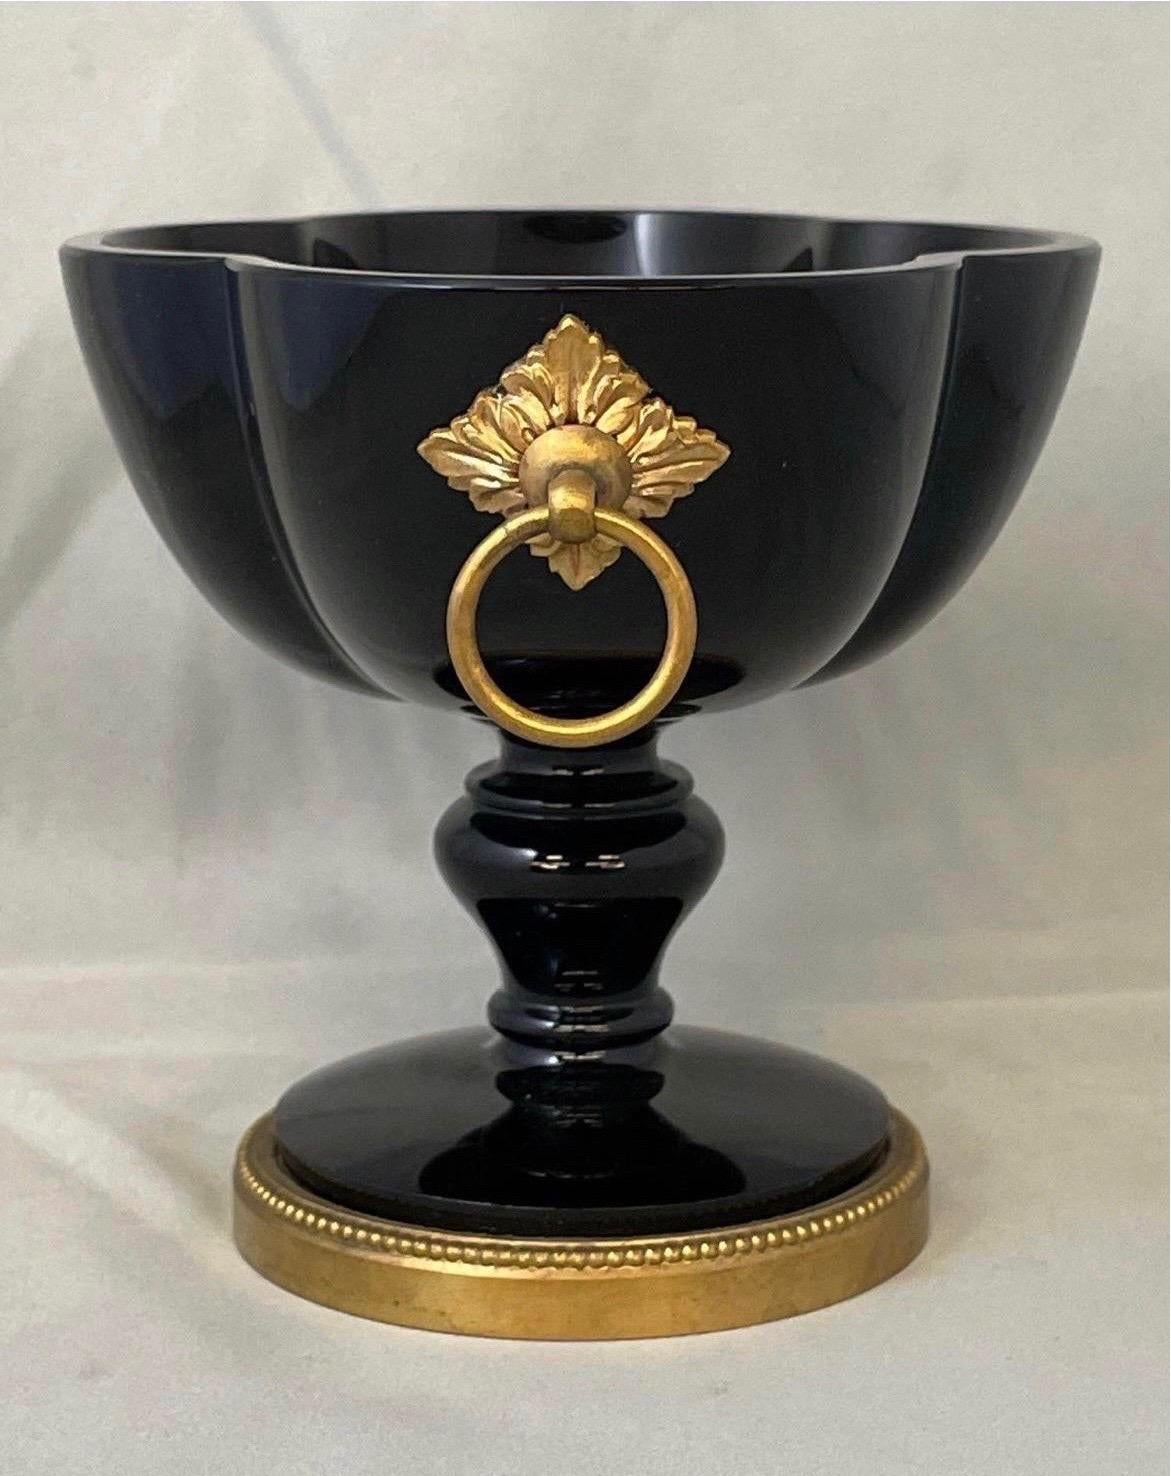 Hard to find form, presents stunning with the modern black glass and sleek gilt bronze mounts. Excellent condition - not a chip or crack on the piece!
Signed to bottom